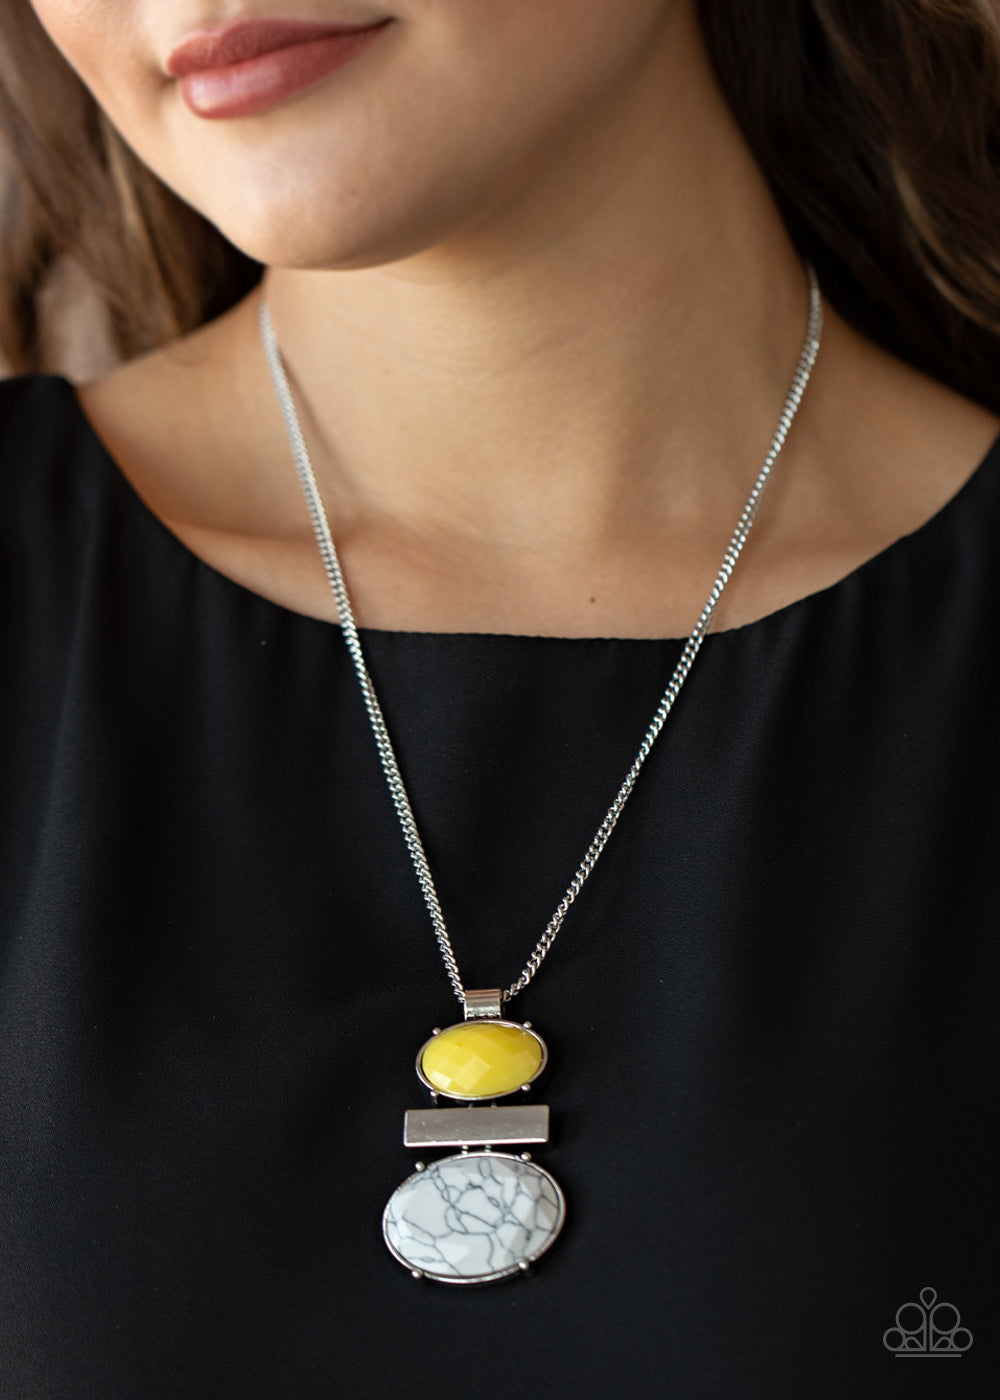 Finding Balance Necklace - Yellow